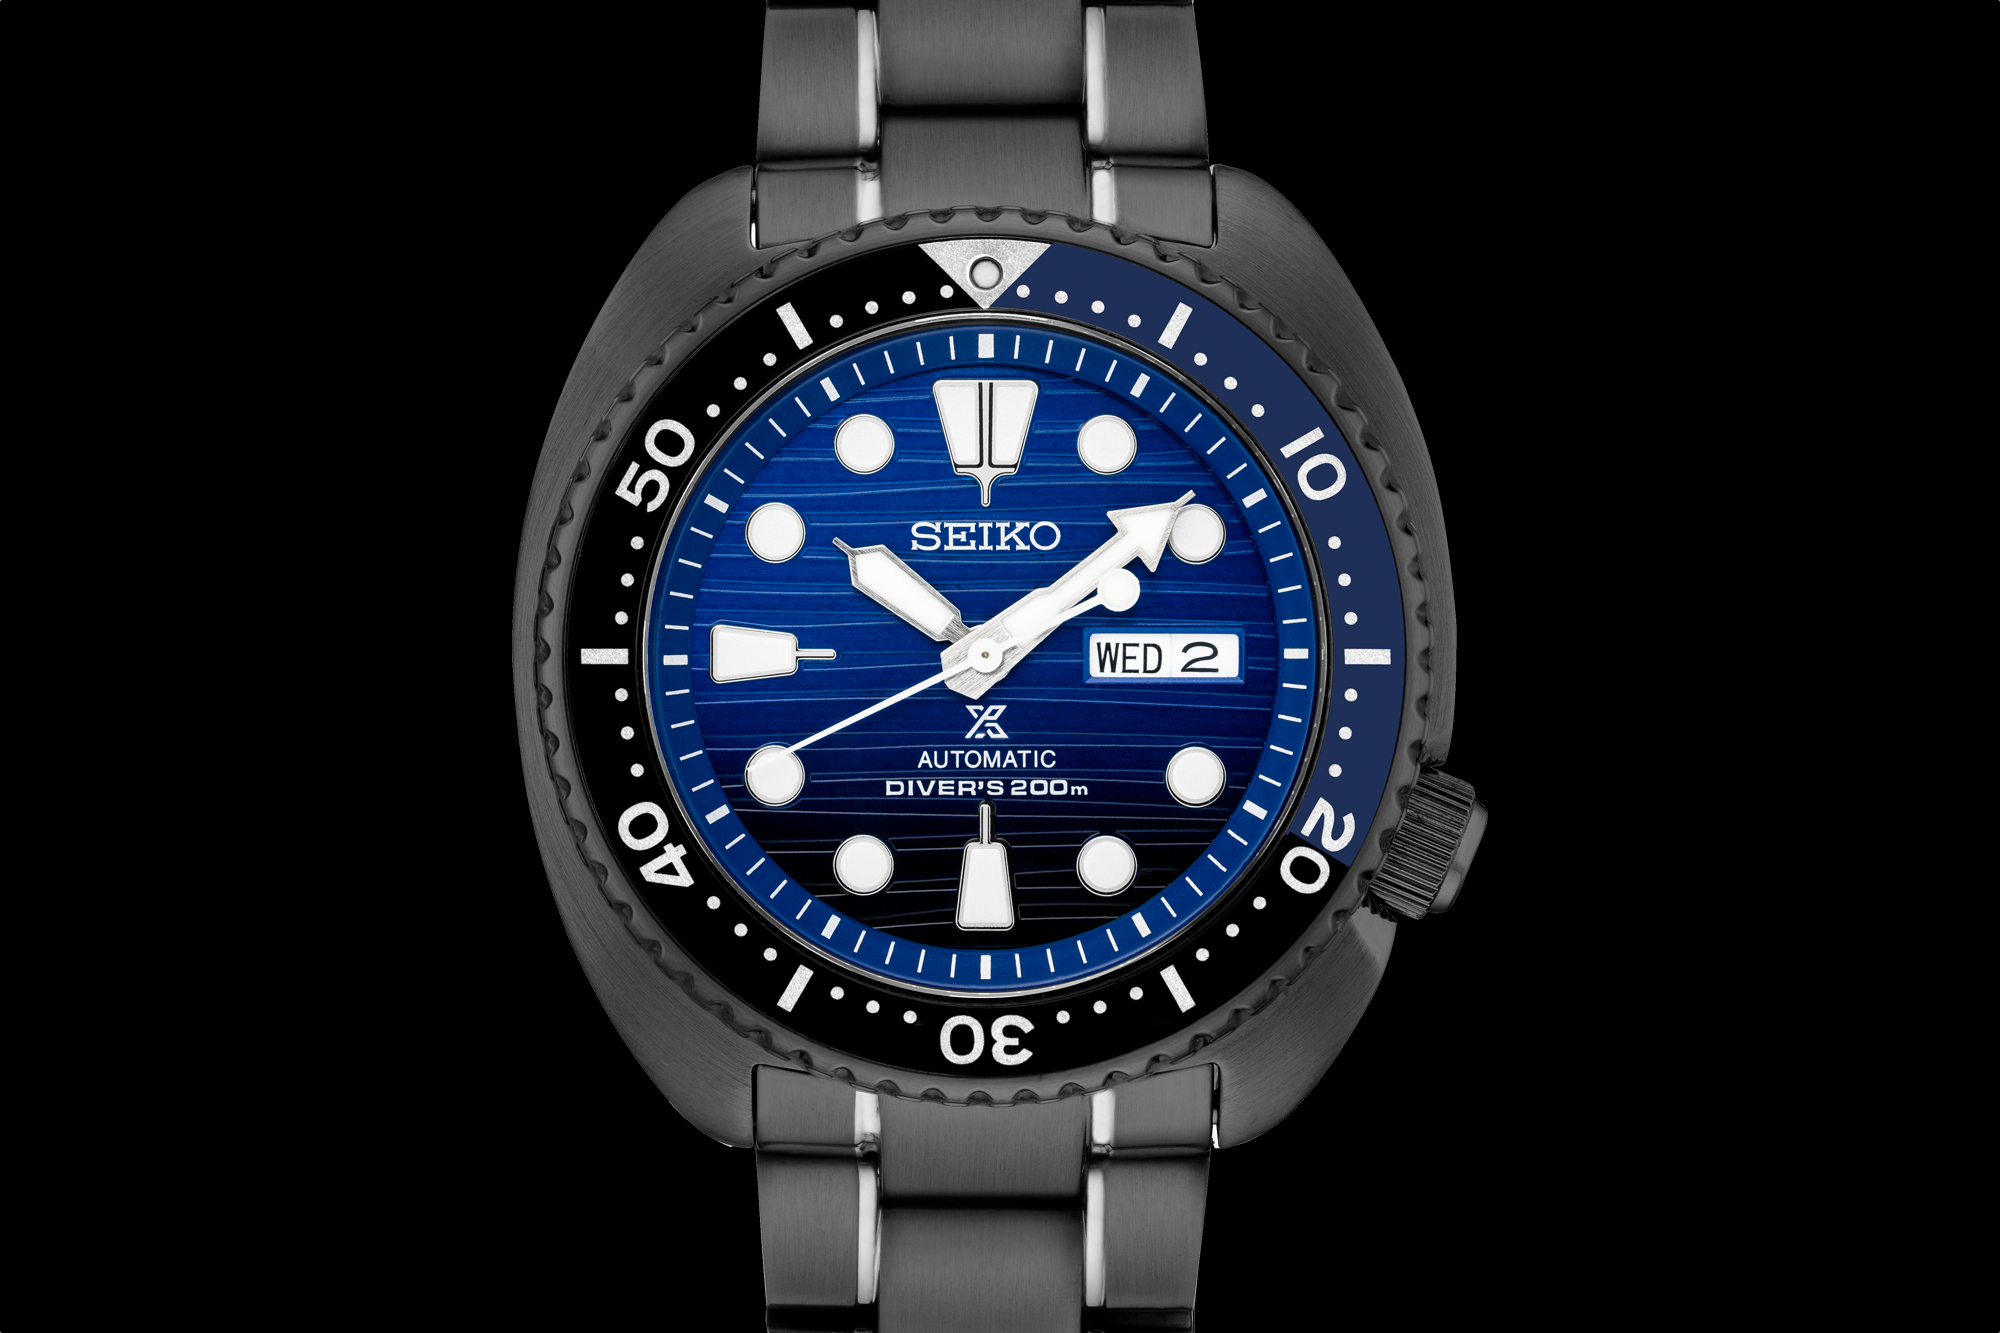 Introducing the Seiko Prospex Turtle SRPD11